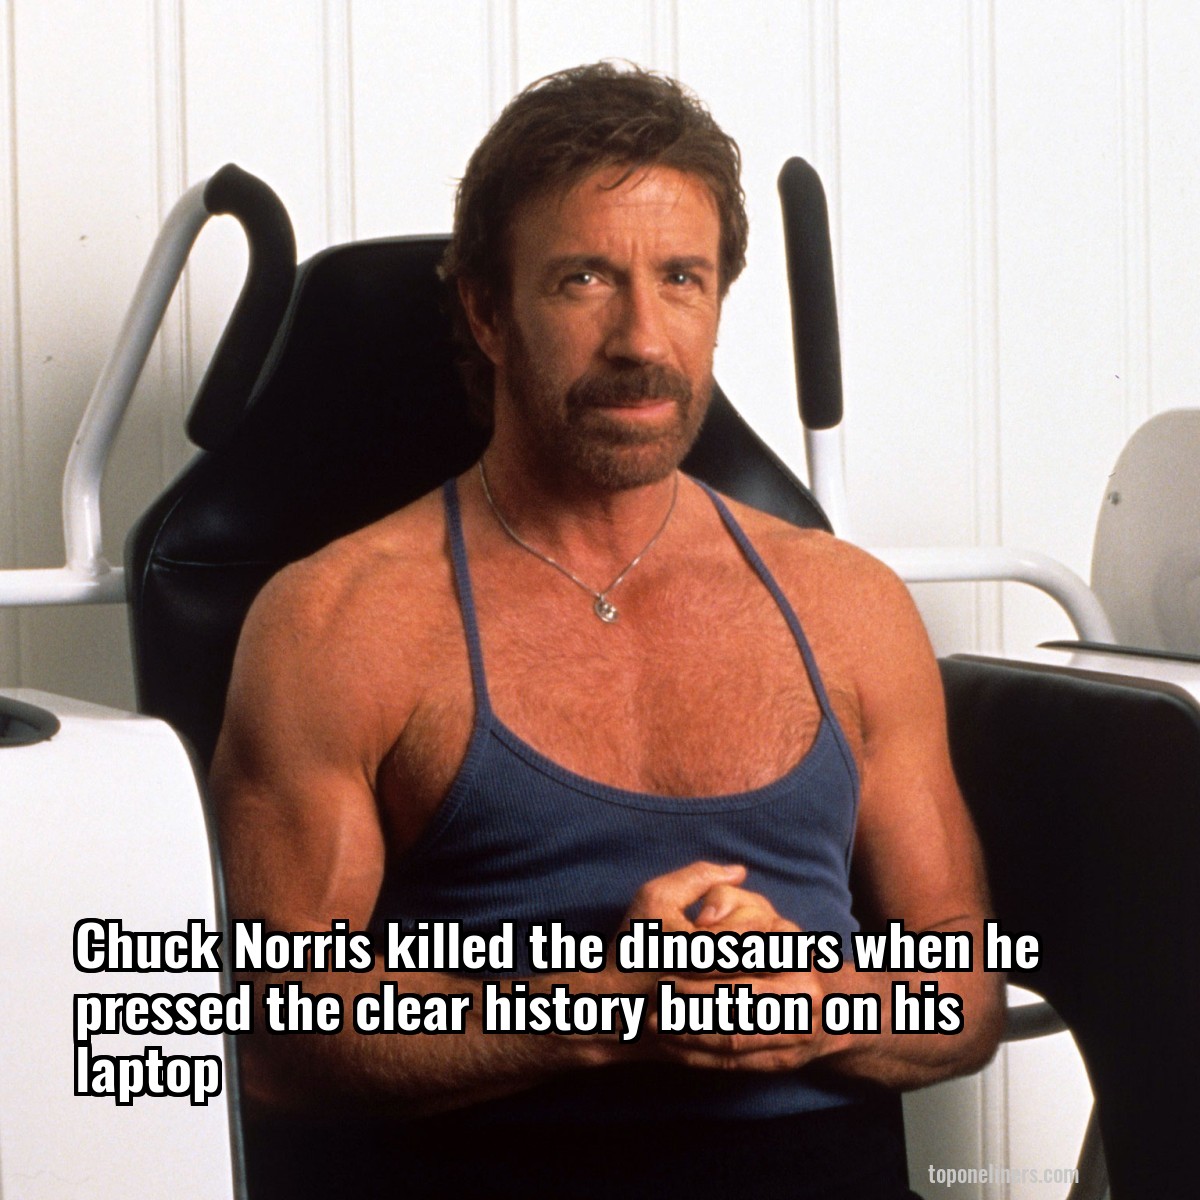 Chuck Norris killed the dinosaurs when he pressed the clear history button on his laptop